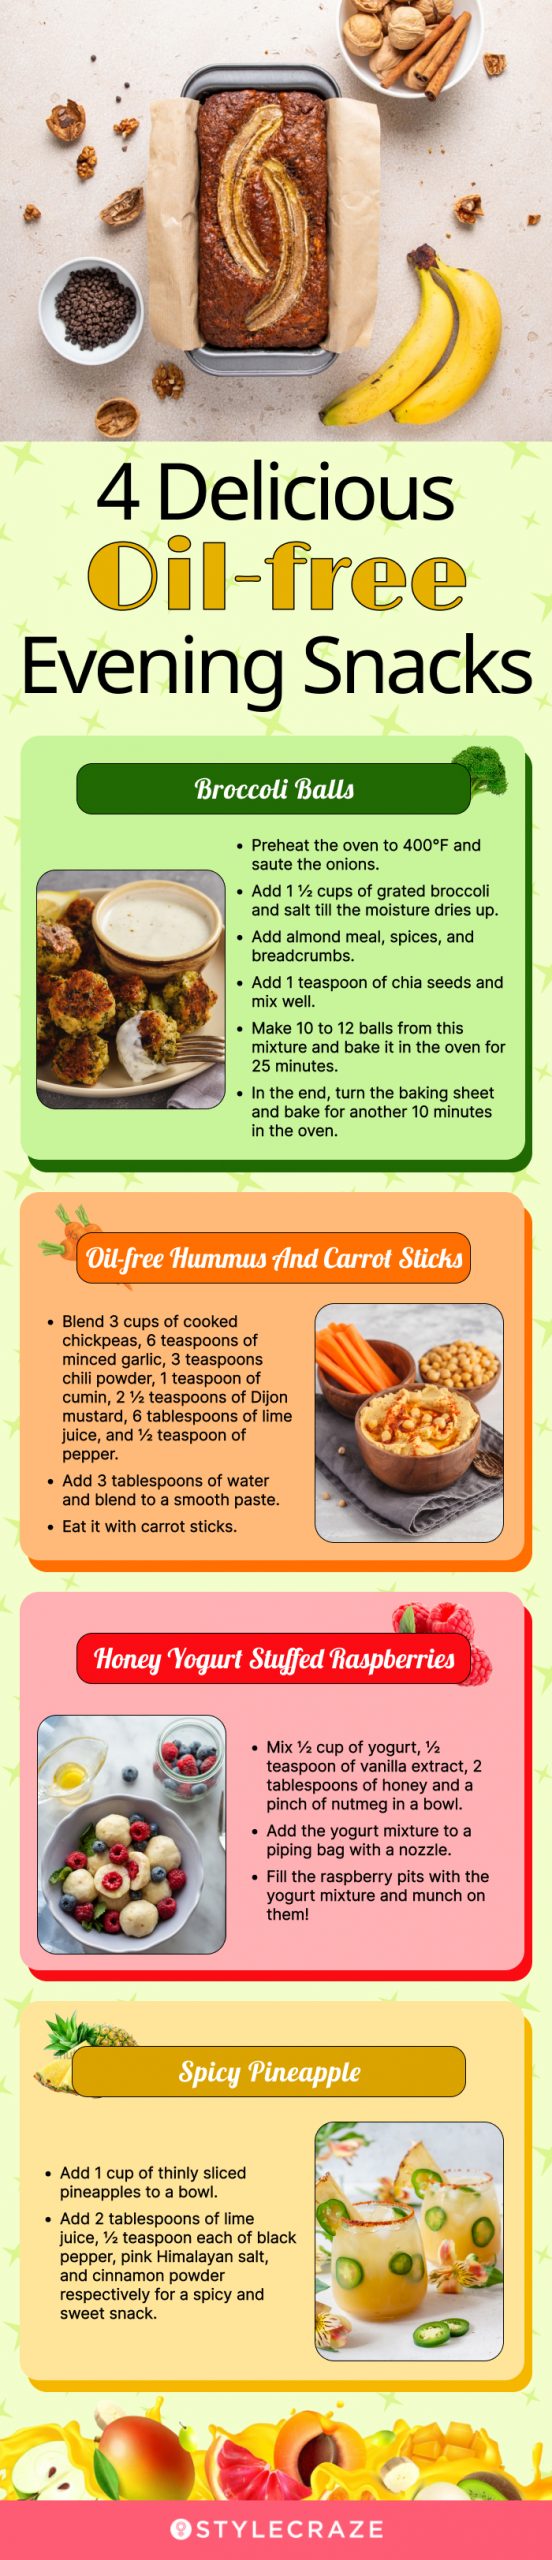 4 delicious oil free evening snacks (infographic)